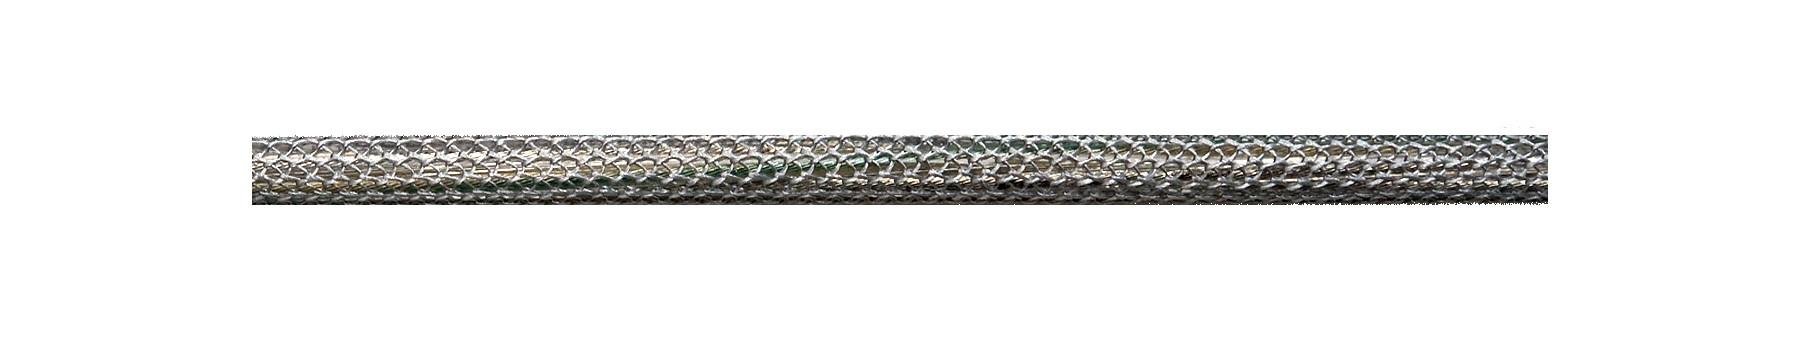 Textile Cable Silver-Grey Netlike Textile Covering